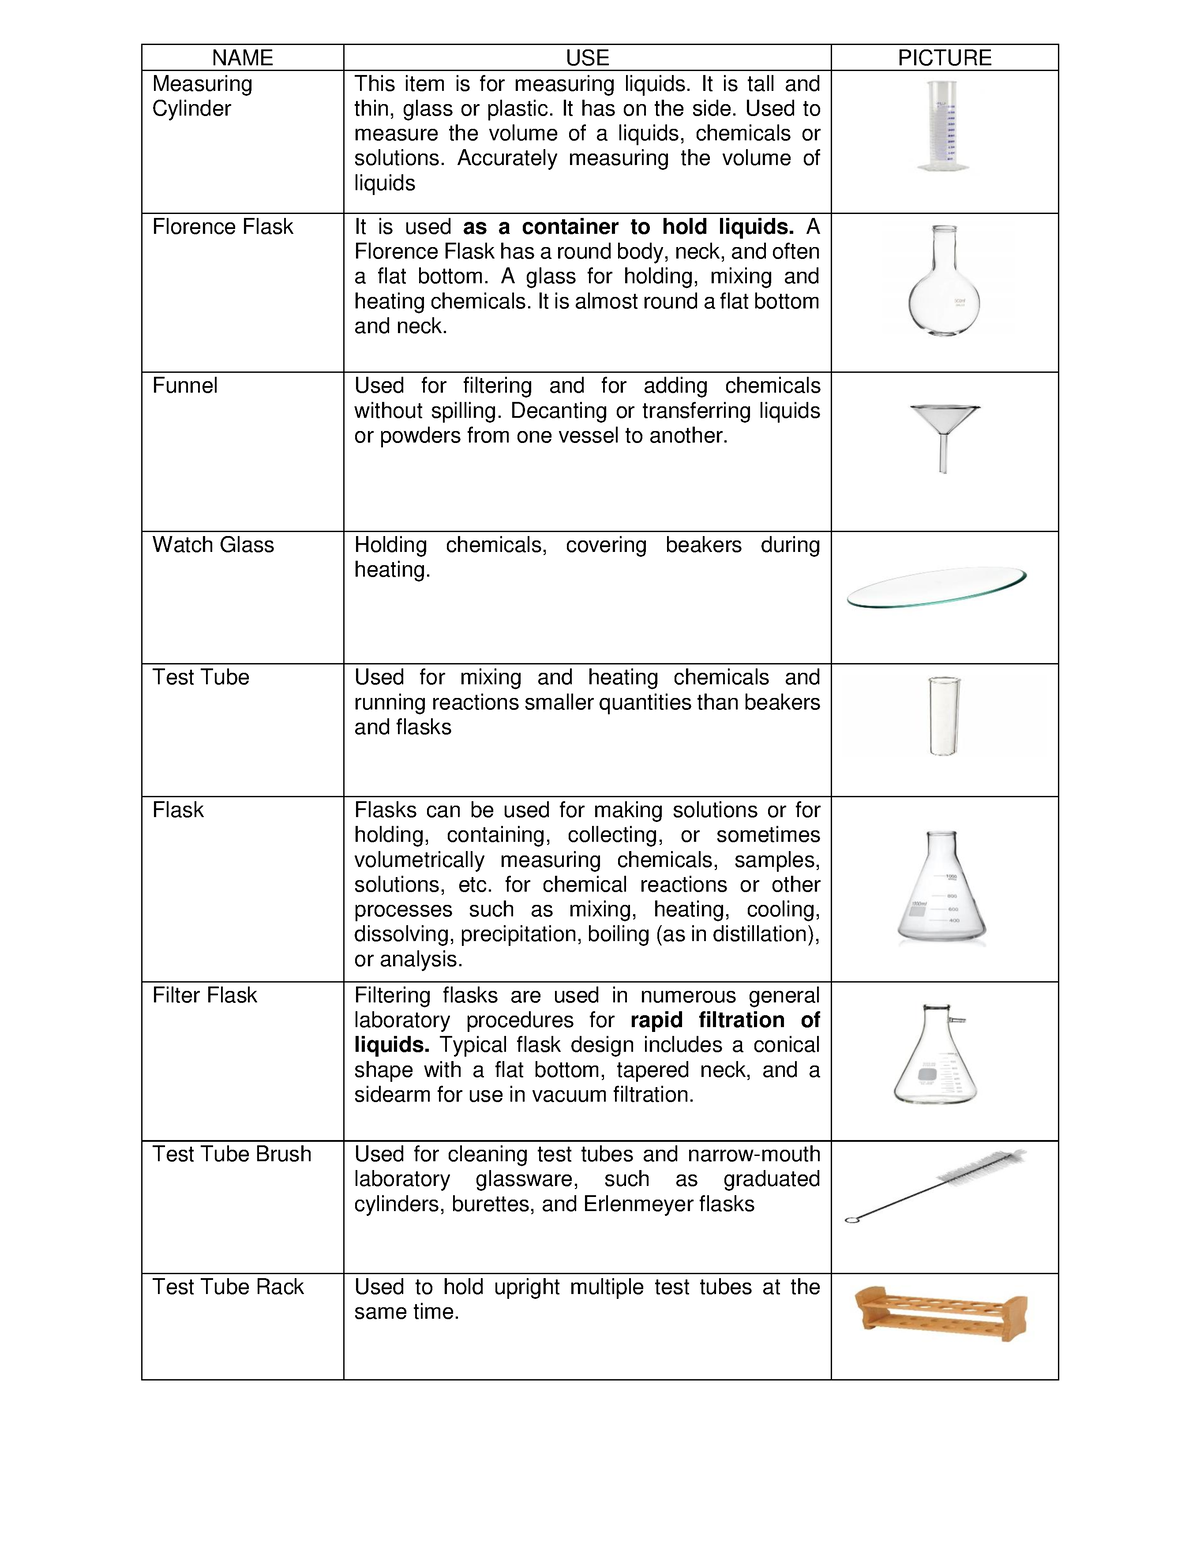 Science Laboratory Apparatus Equipment AND USES - NAME USE PICTURE ...